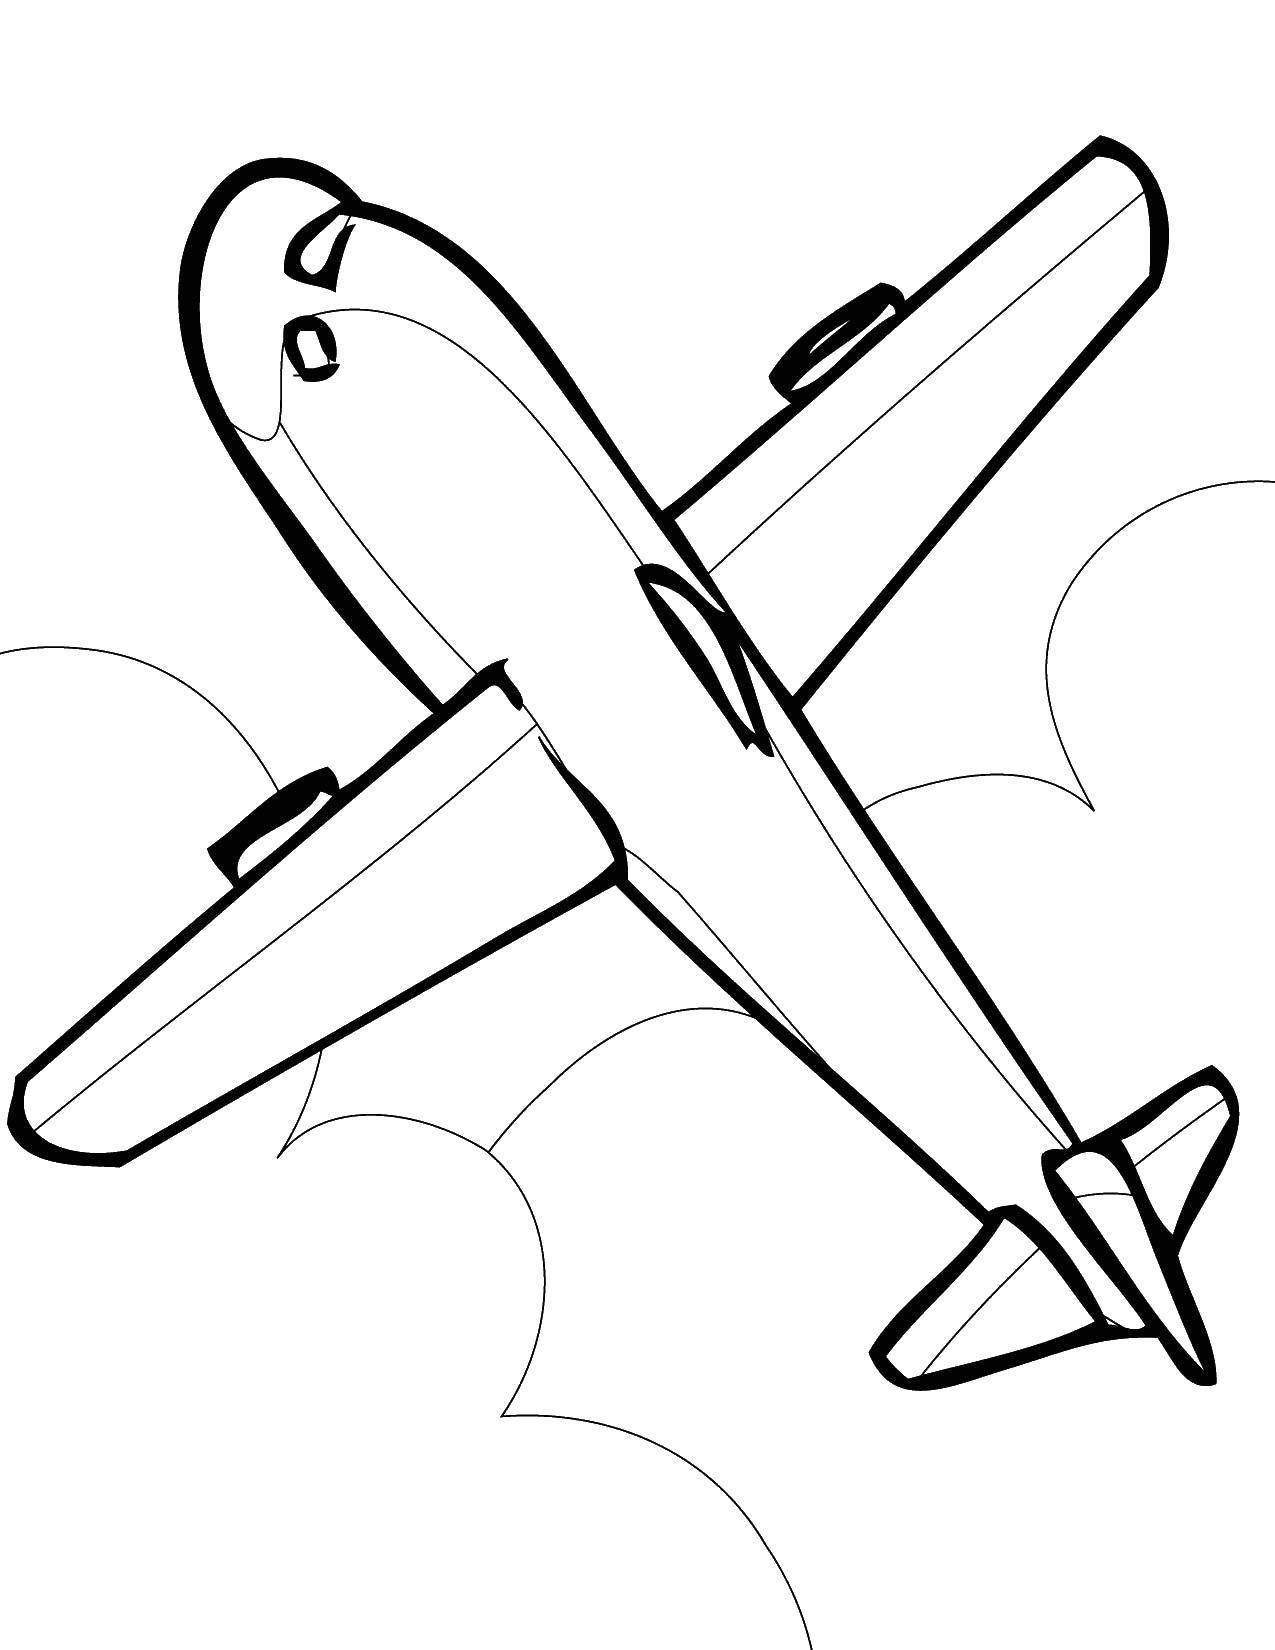 Coloring Hovering a plane. Category The planes. Tags:  Plane.